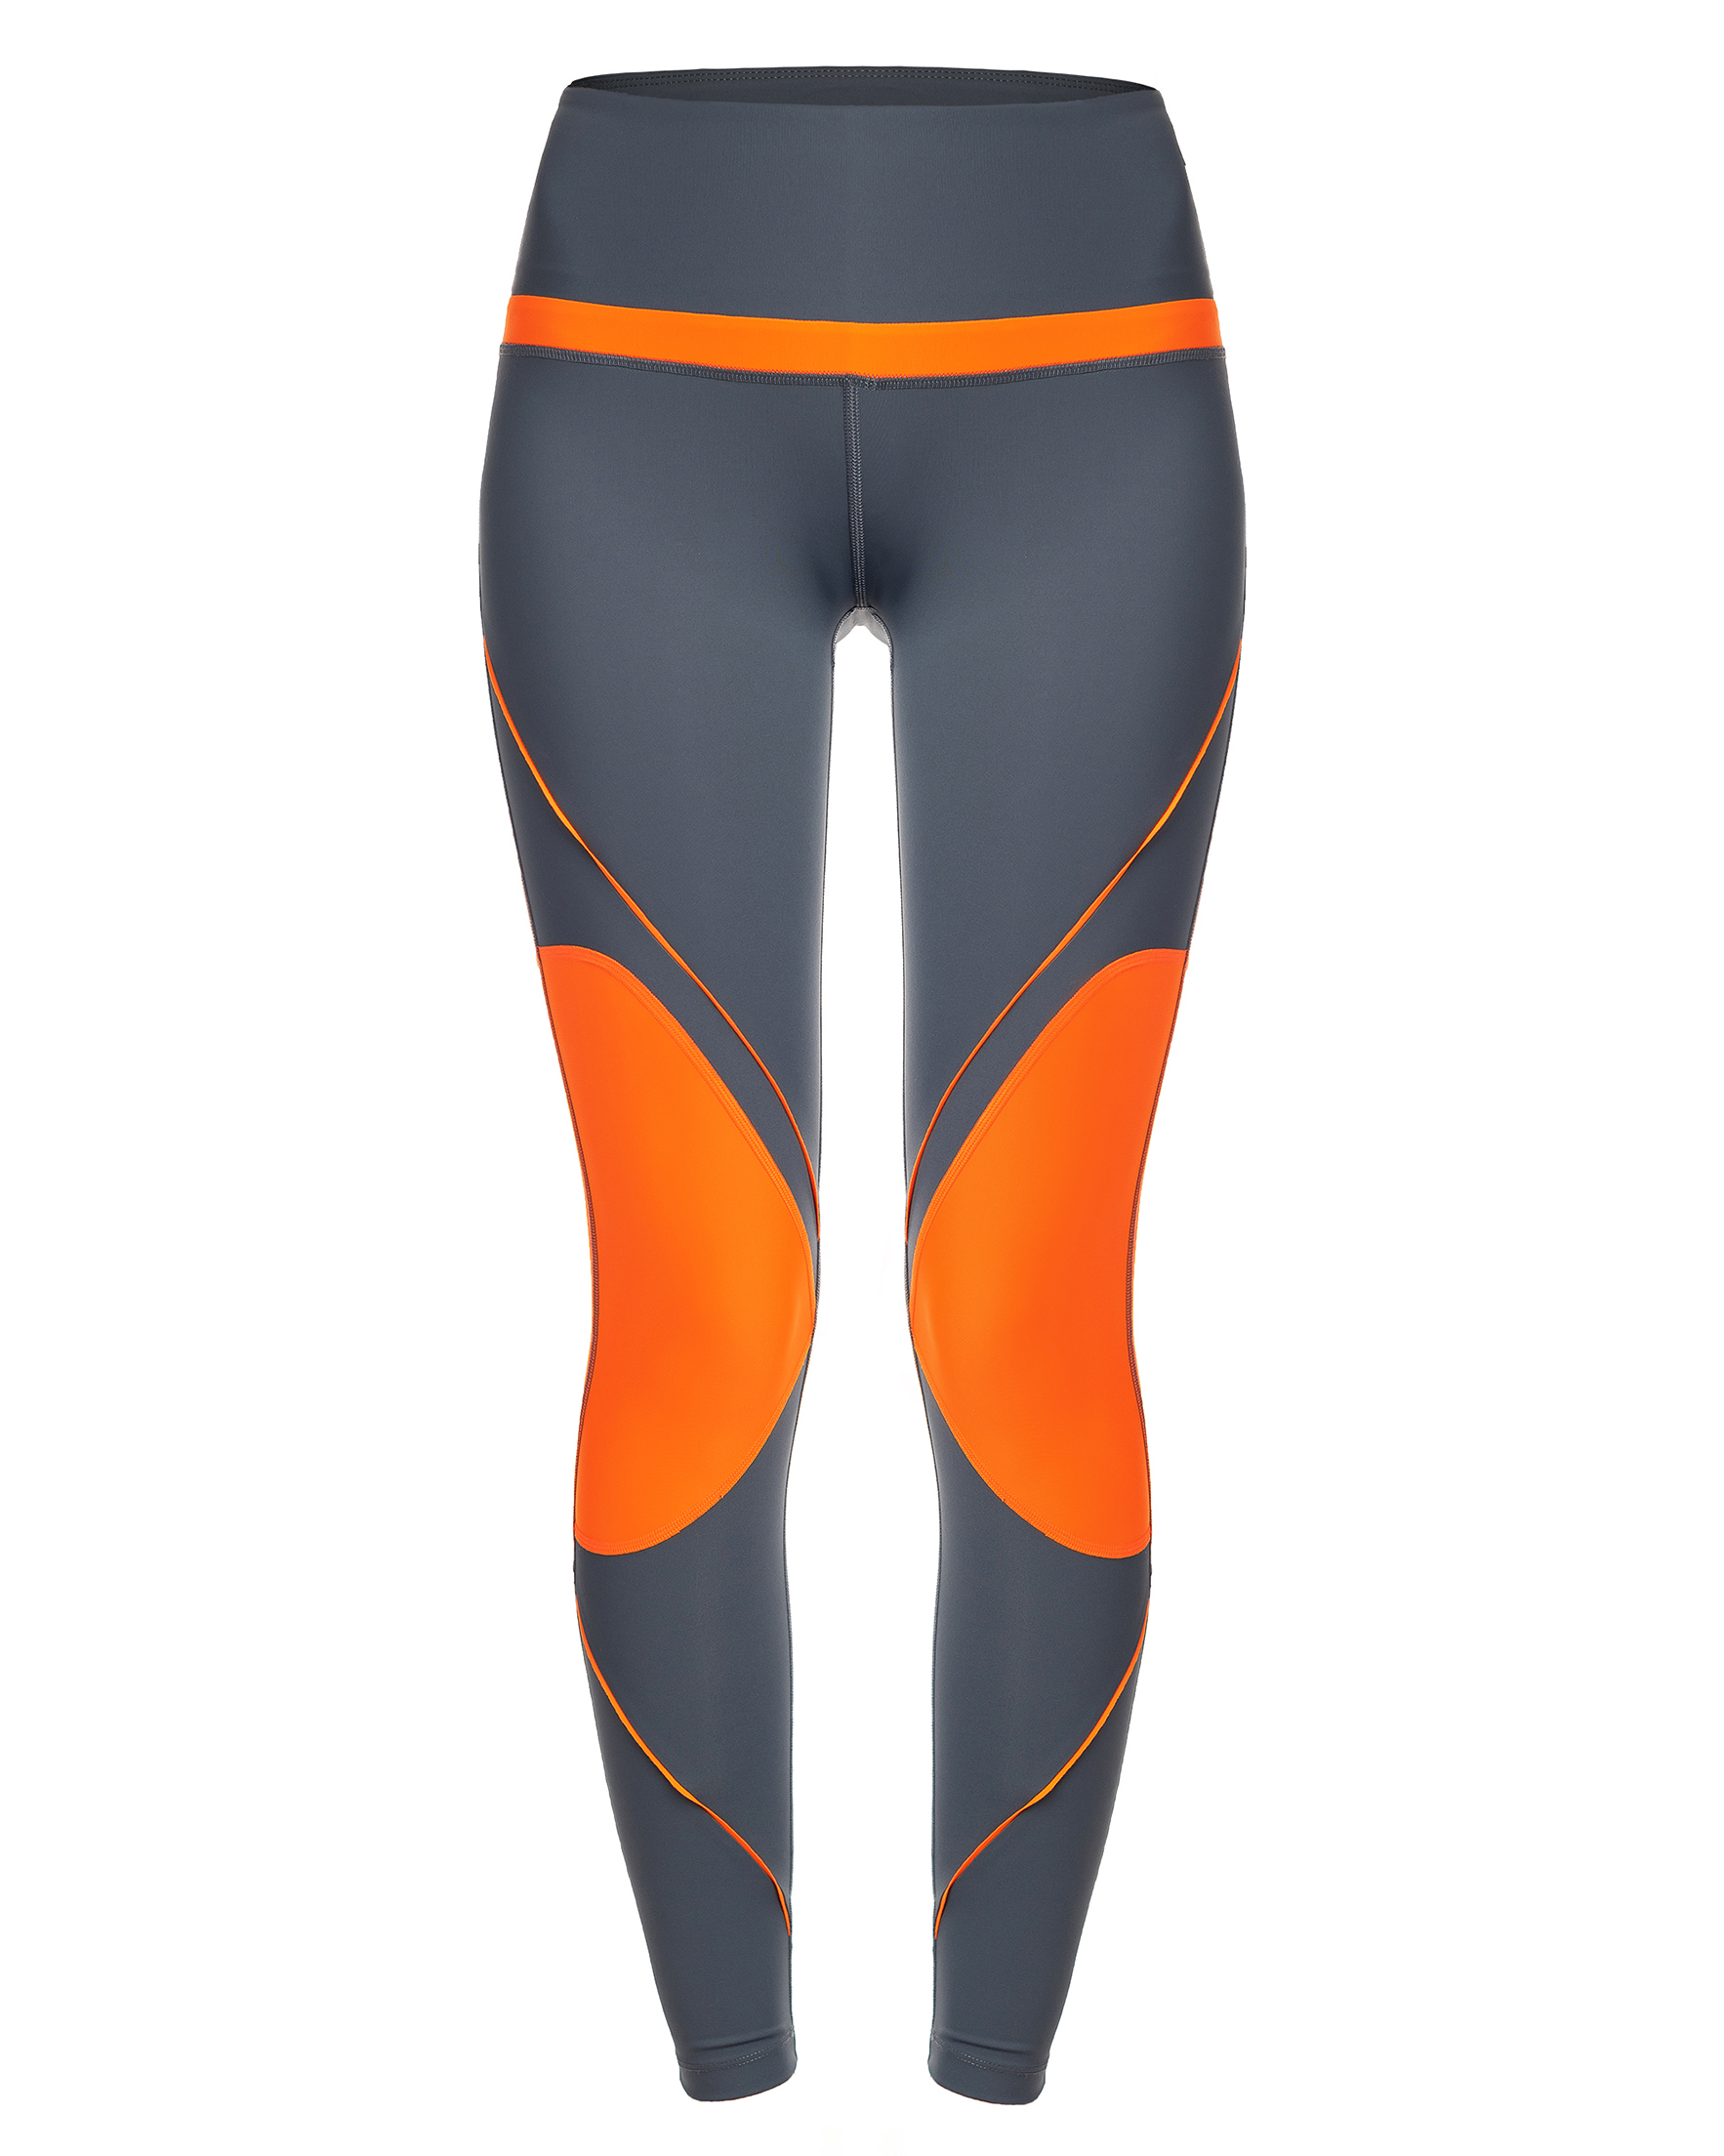 WOMAN LEGGINGS GREY AND ORANGE This sportive leggings are the